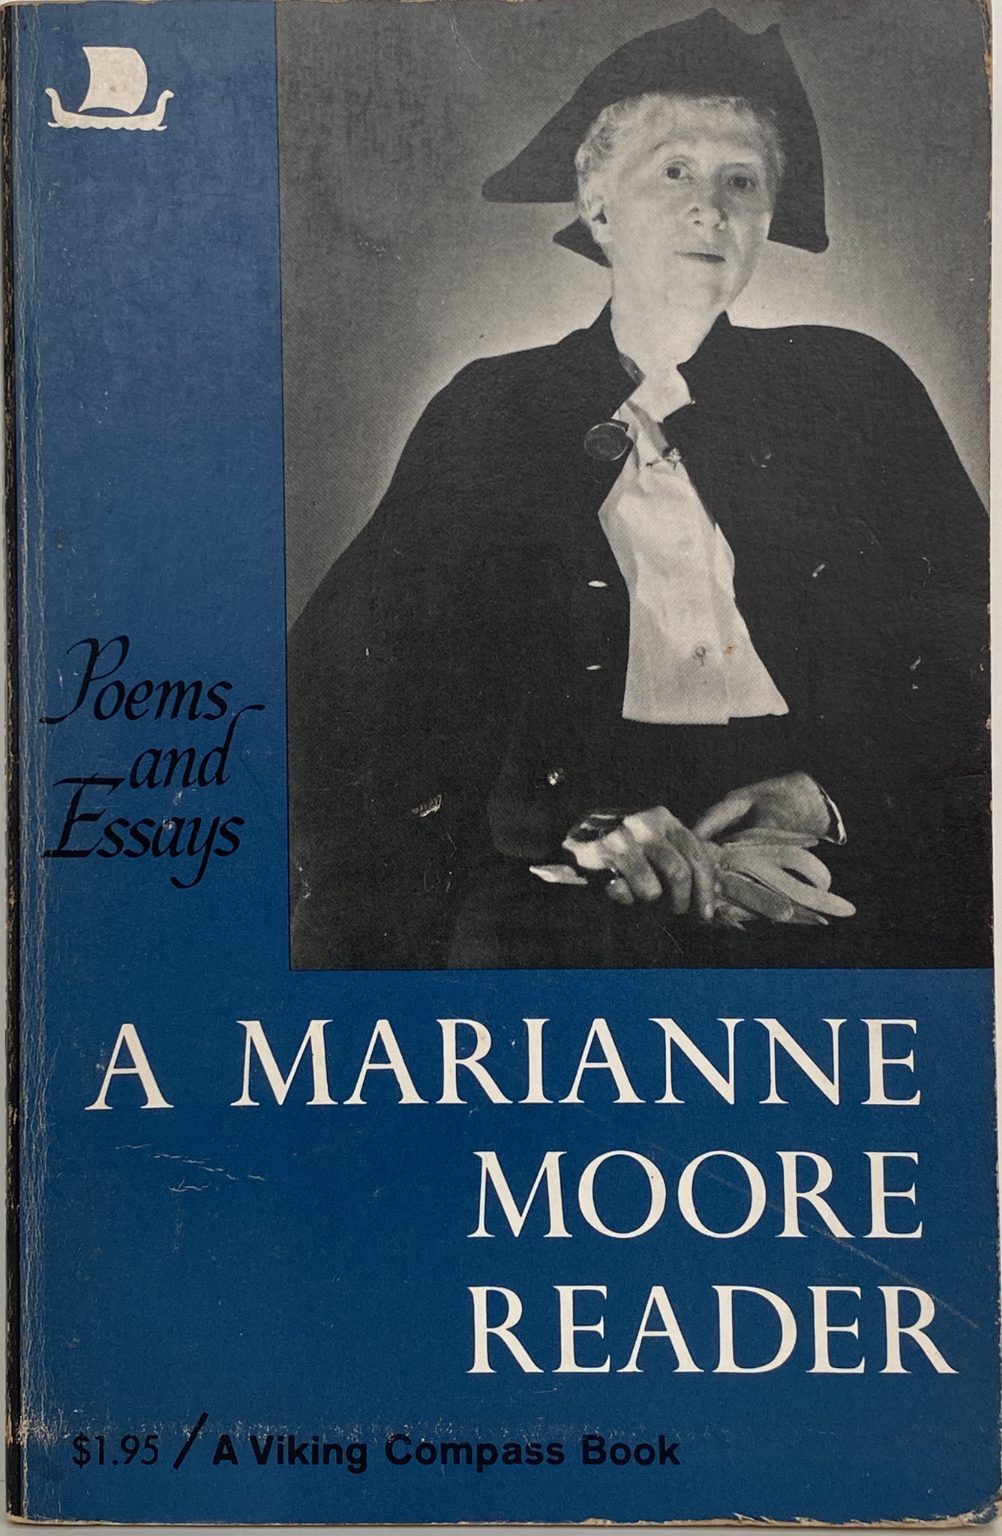 A MARIANNE MOORE READER: Poems and Essays